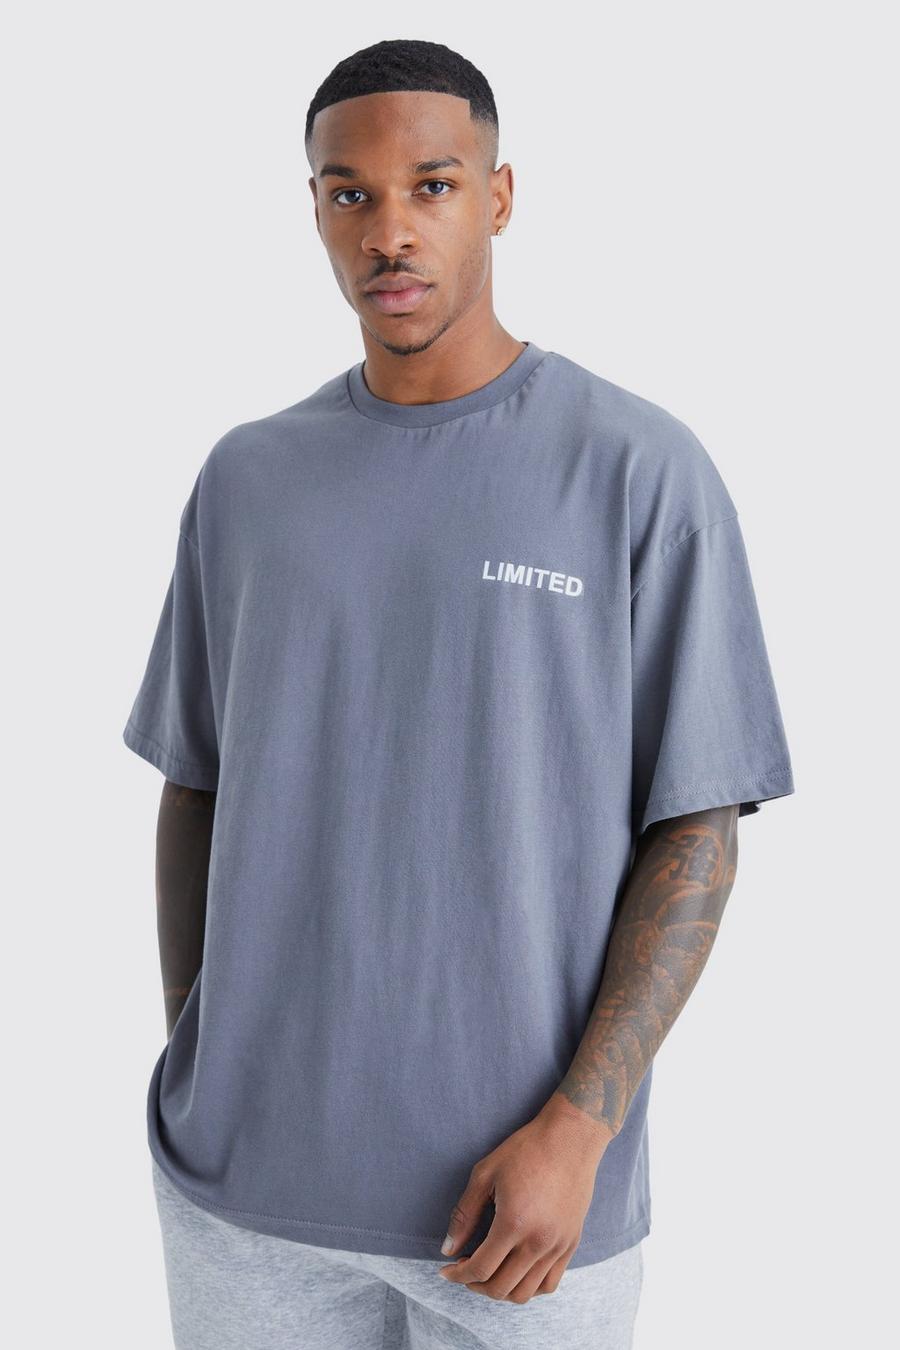 Dark grey Oversized Raised Limited Text T-shirt image number 1